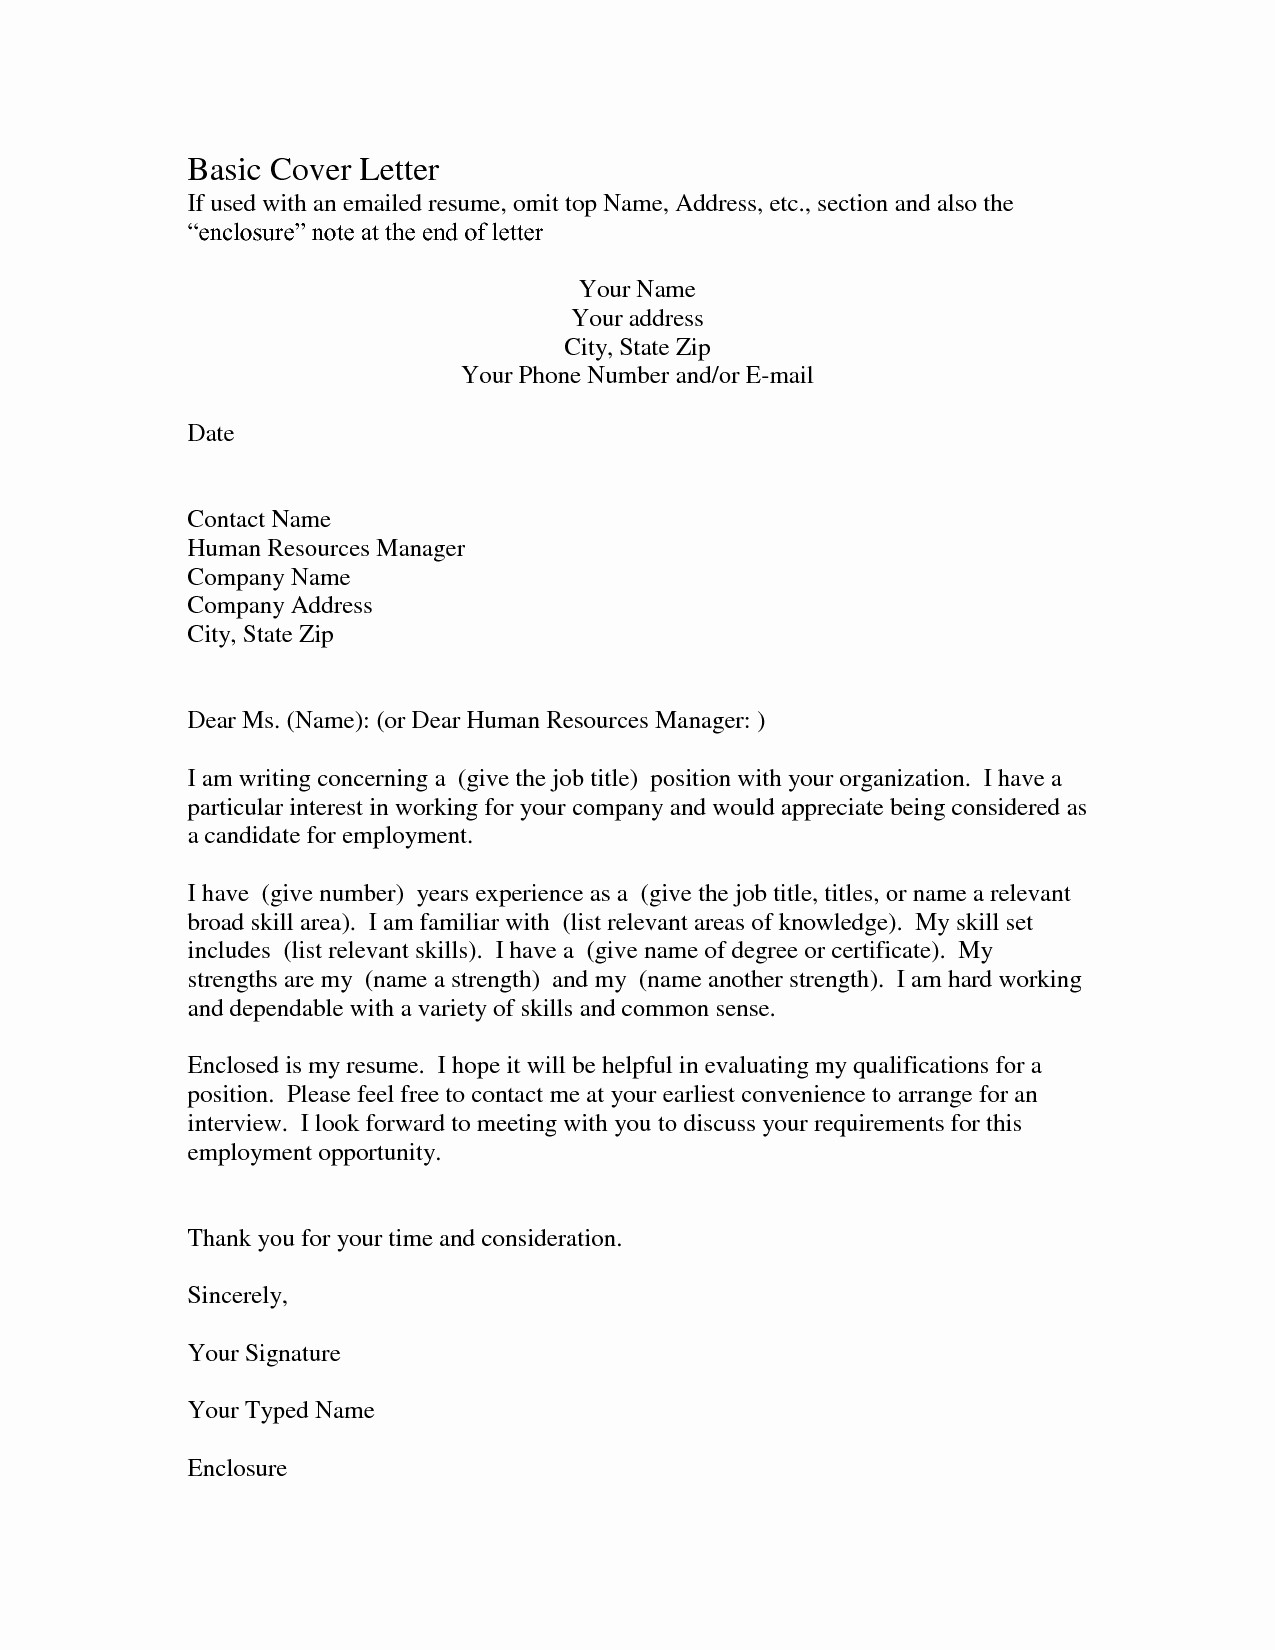 Cover Letter Template Fill In - Resumes and Cover Letters Luxury Fresh Cover Letter Fill In Awesome